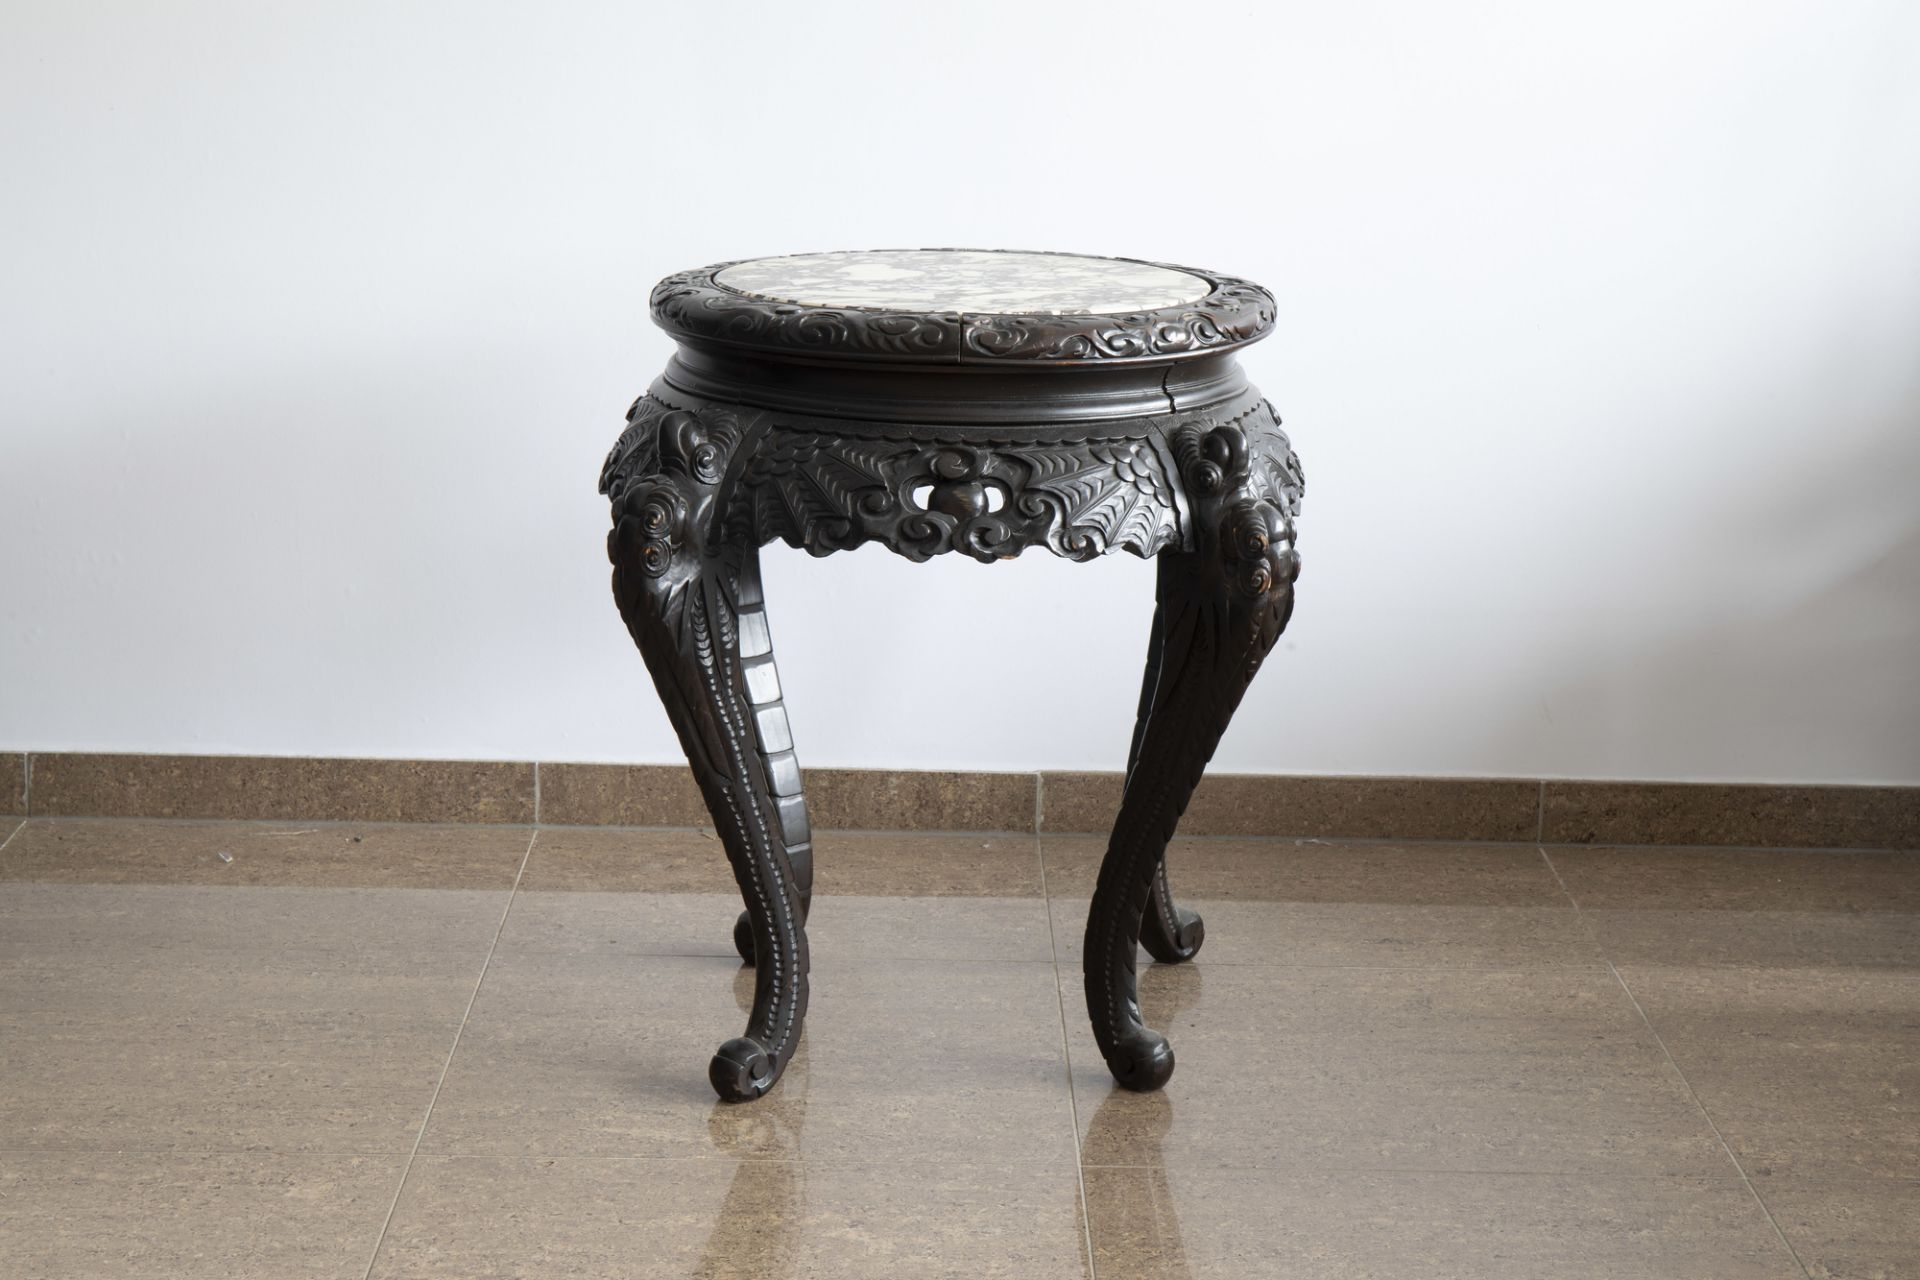 A Chinese or Japanese wooden table with marble top and dragon shaped legs, 20th C. - Image 6 of 7